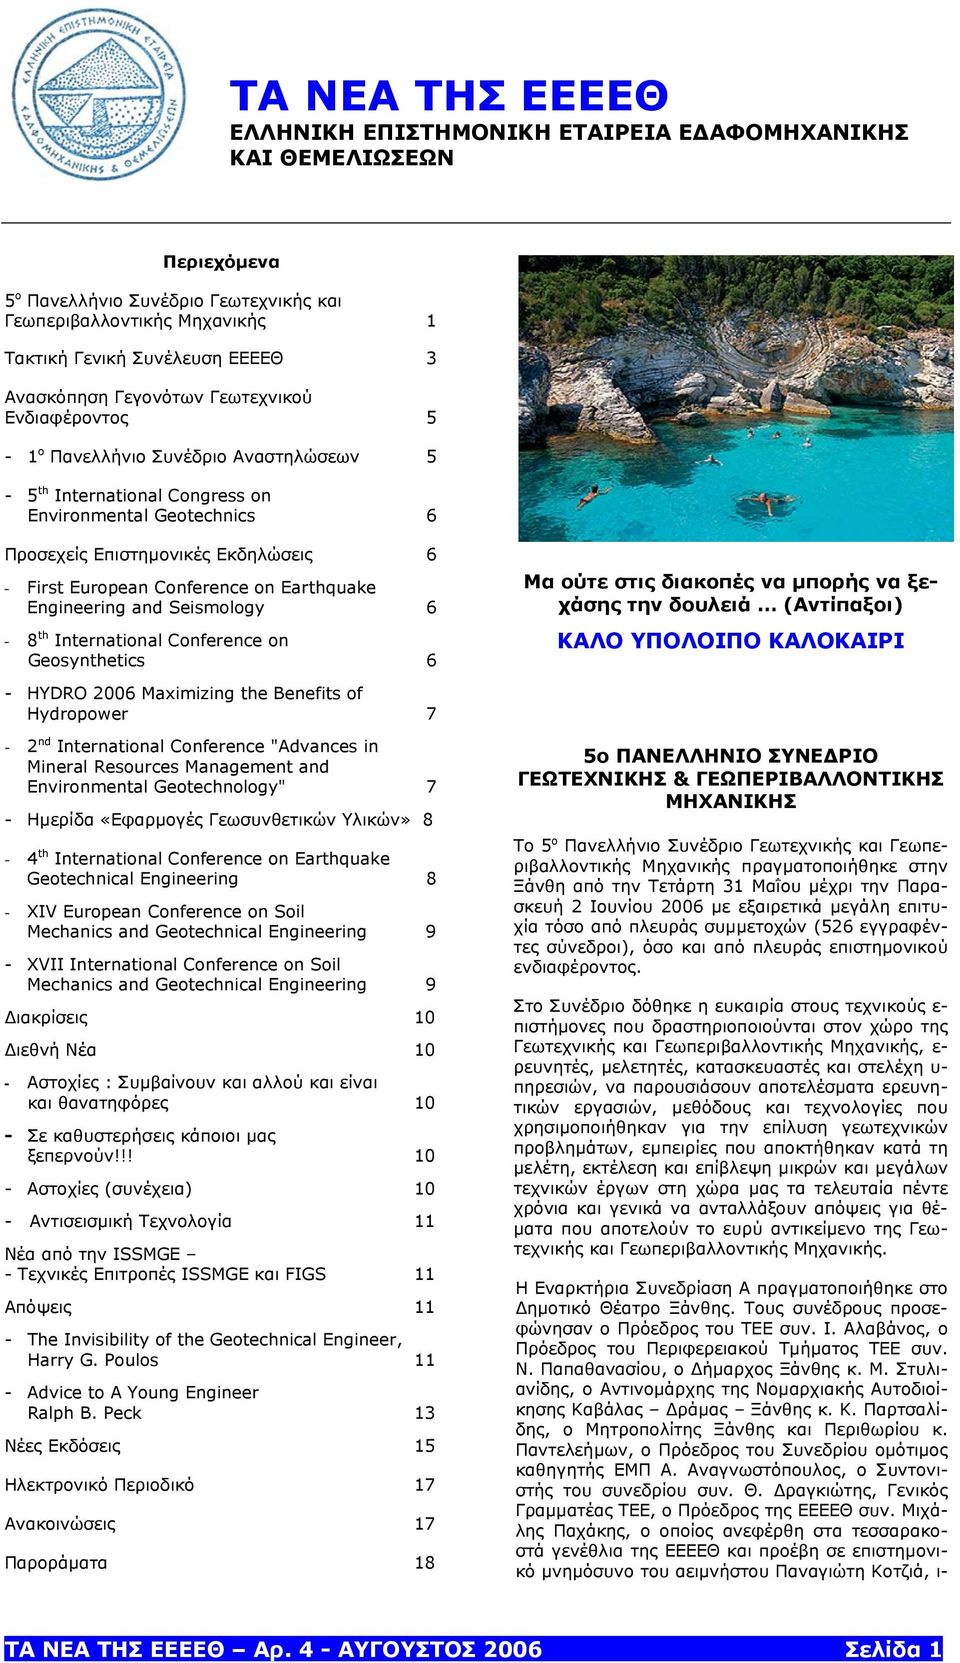 European Conference on Earthquake Engineering and Seismology 6-8 th International Conference on Geosynthetics 6 - HYDRO 2006 Maximizing the Benefits of Hydropower 7-2 nd International Conference